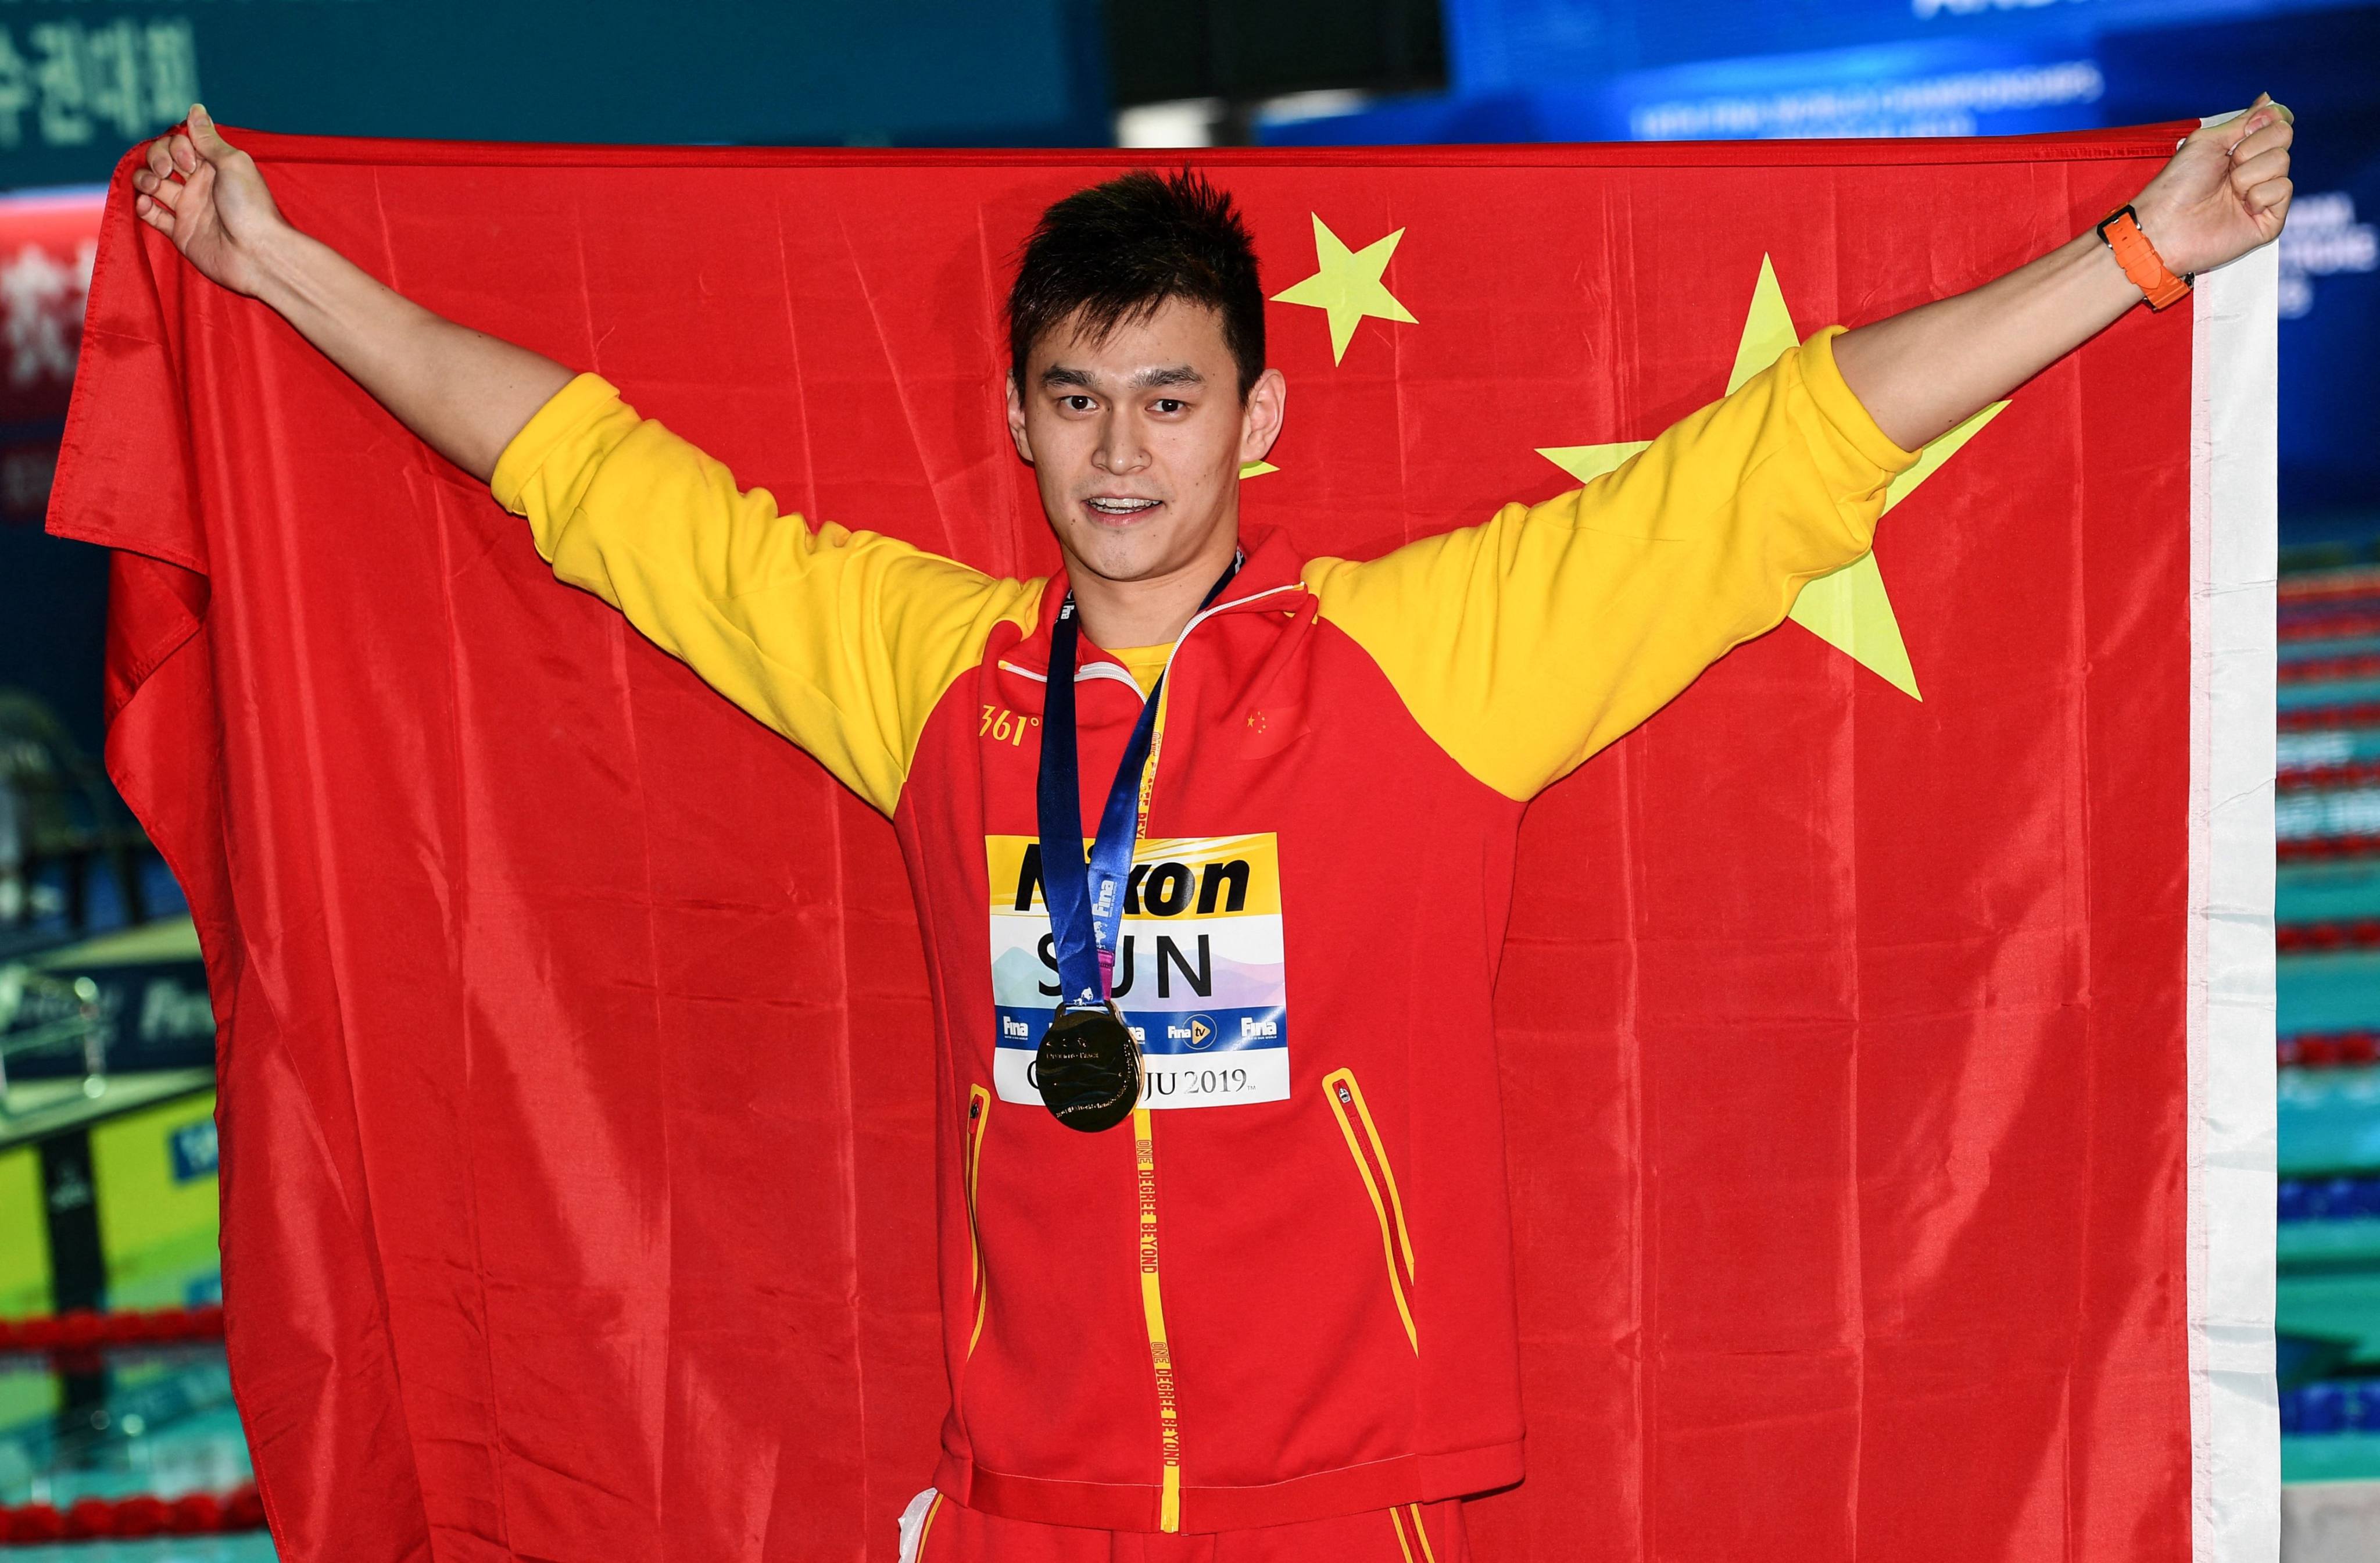 Sun Yang poses with his gold medal after winning the men’s 400m freestyle at the 2019 World Championships. Photo: AFP